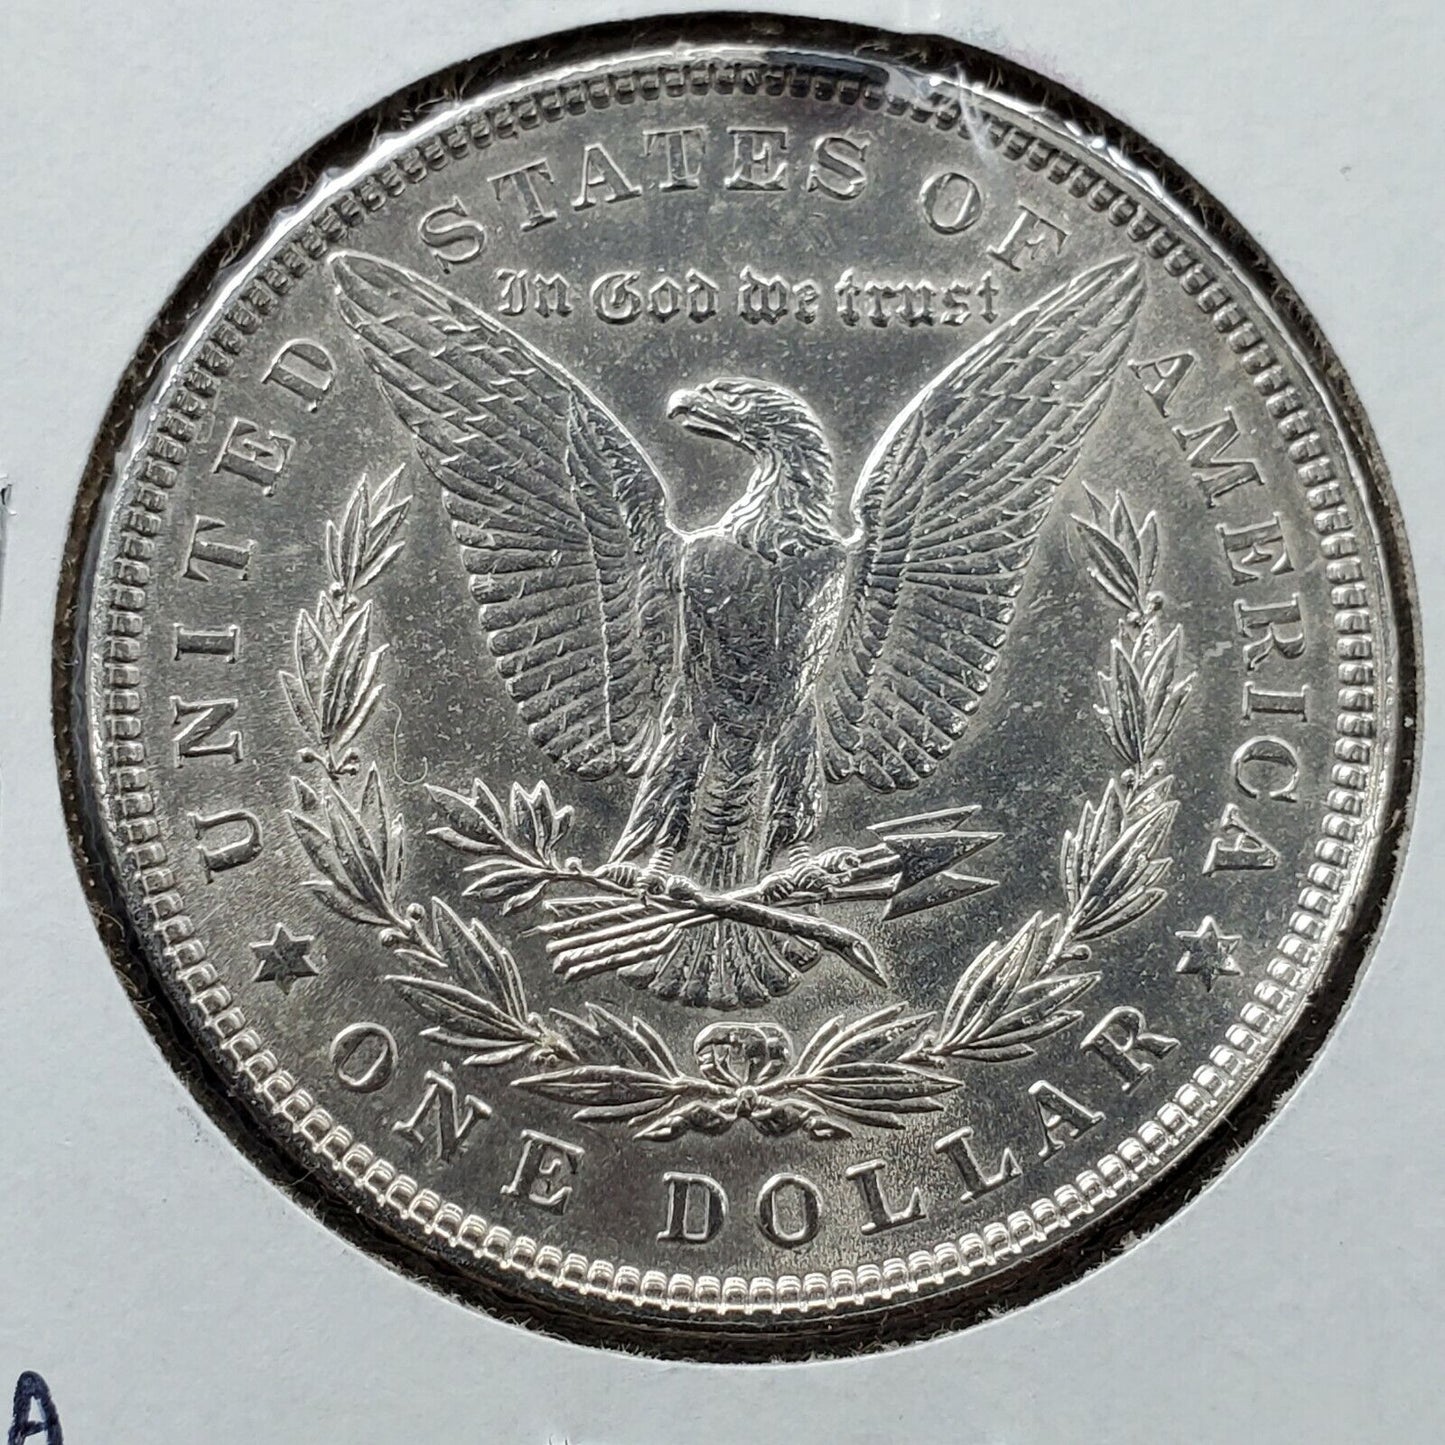 1903 P $1 Morgan Silver Eagle Dollar BU UNC Details Light Cleaning Nice Coin